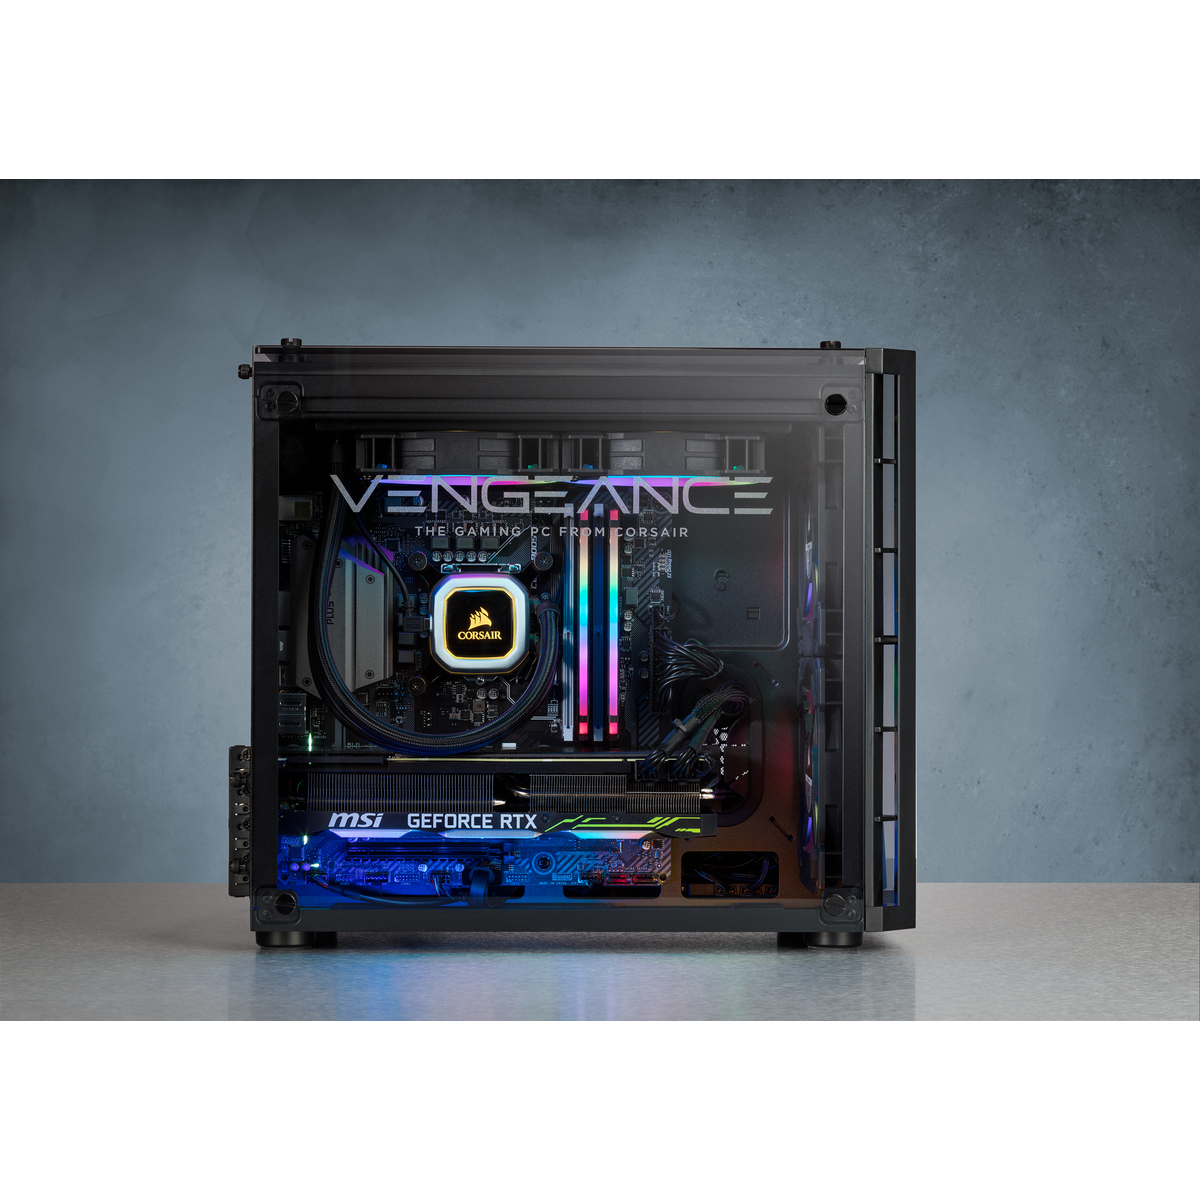 Perfervid Mount Vesuv turnering CORSAIR VENGEANCE 5180 Gaming PC Released – GND-Tech